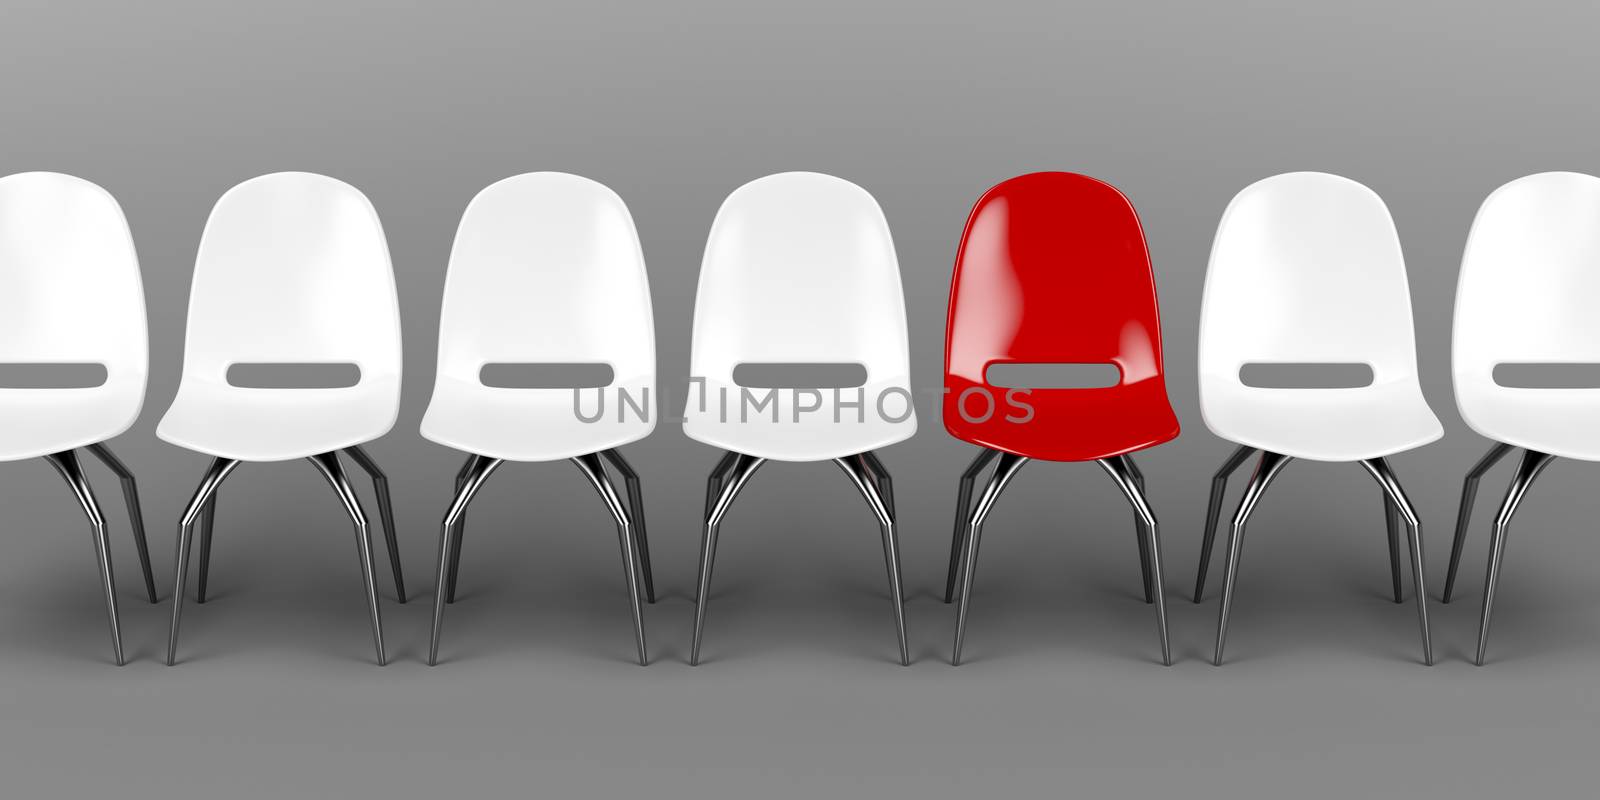 One unique red chair in a row of white chairs